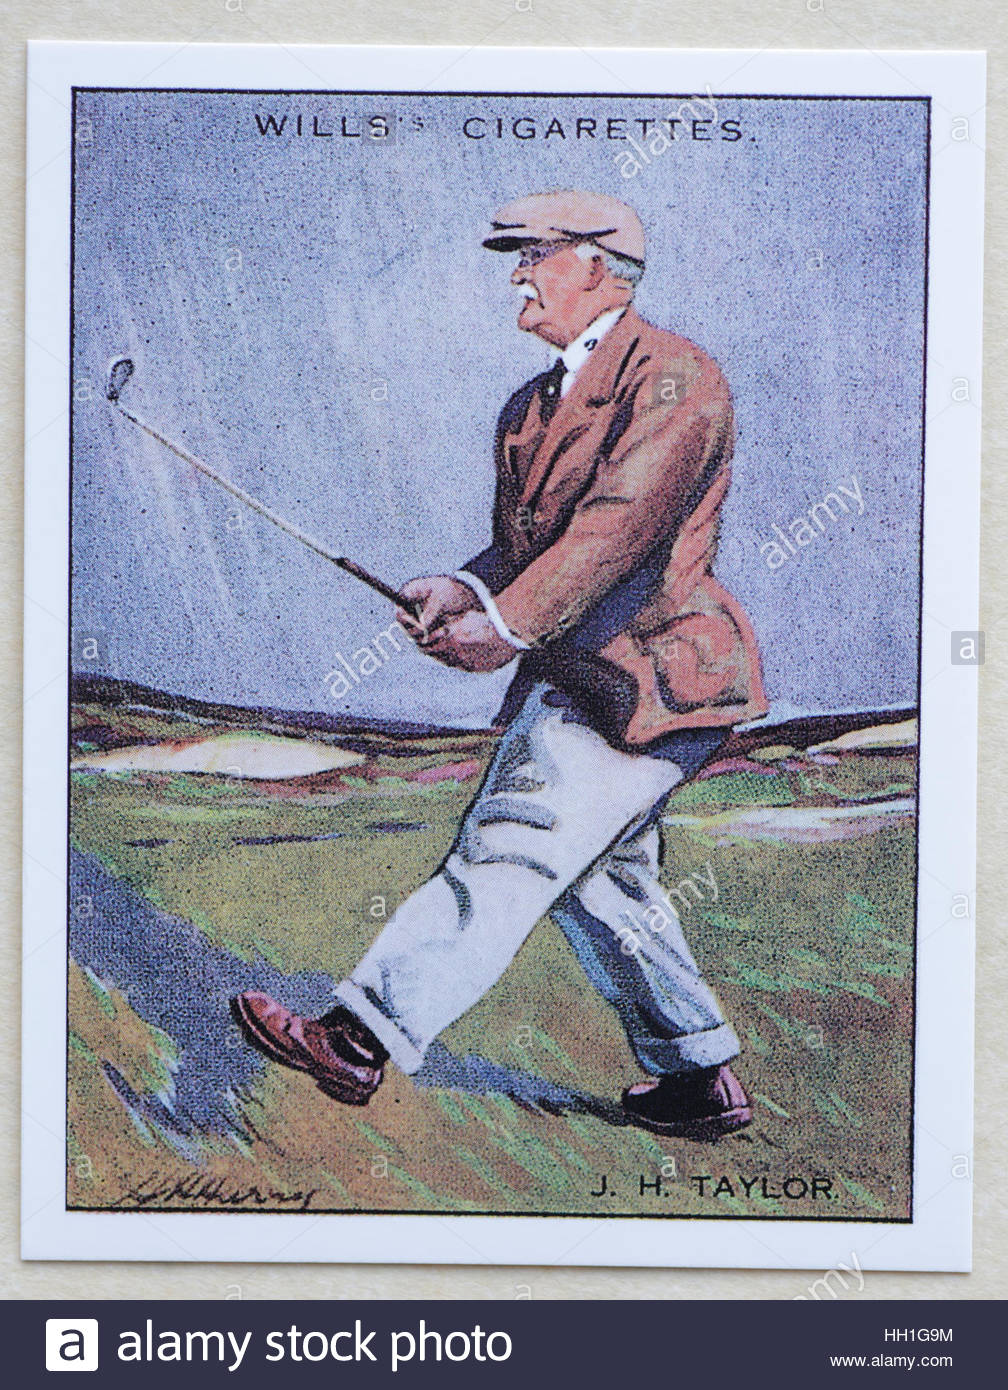 John Henry J.H. Taylor - Famous Golfers, cigarette cards issued in 1930 by W.D.& H.O. Wills cigarettes. Stock Photo